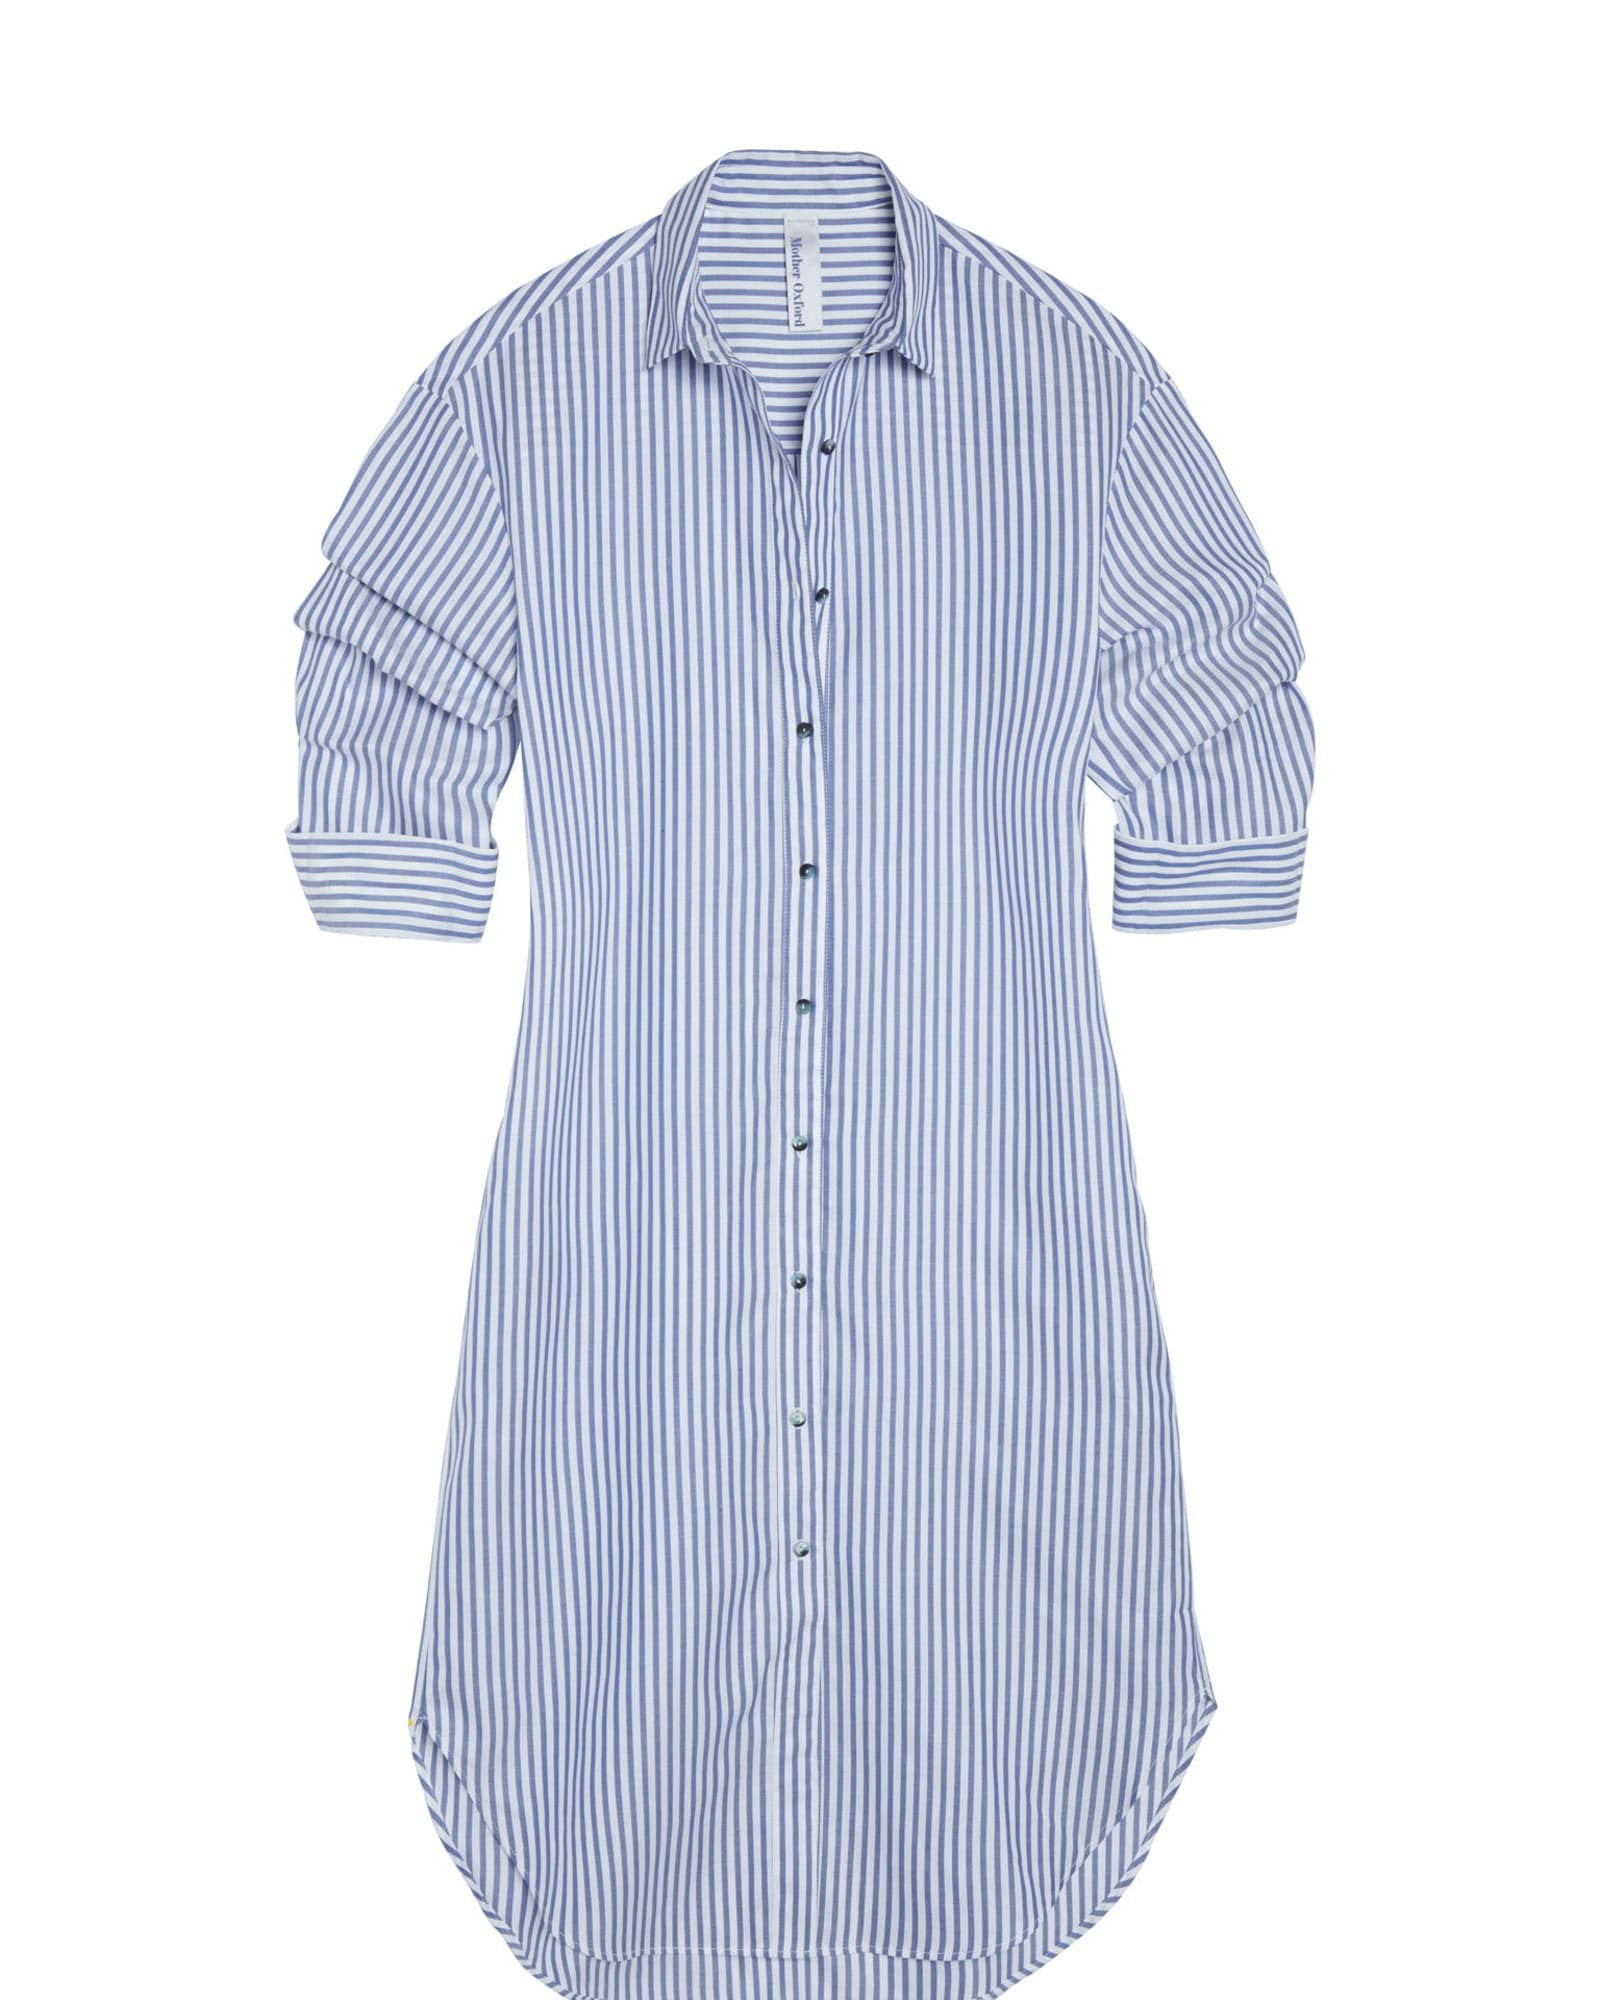 The Shirtdress | Blue and White Stripe